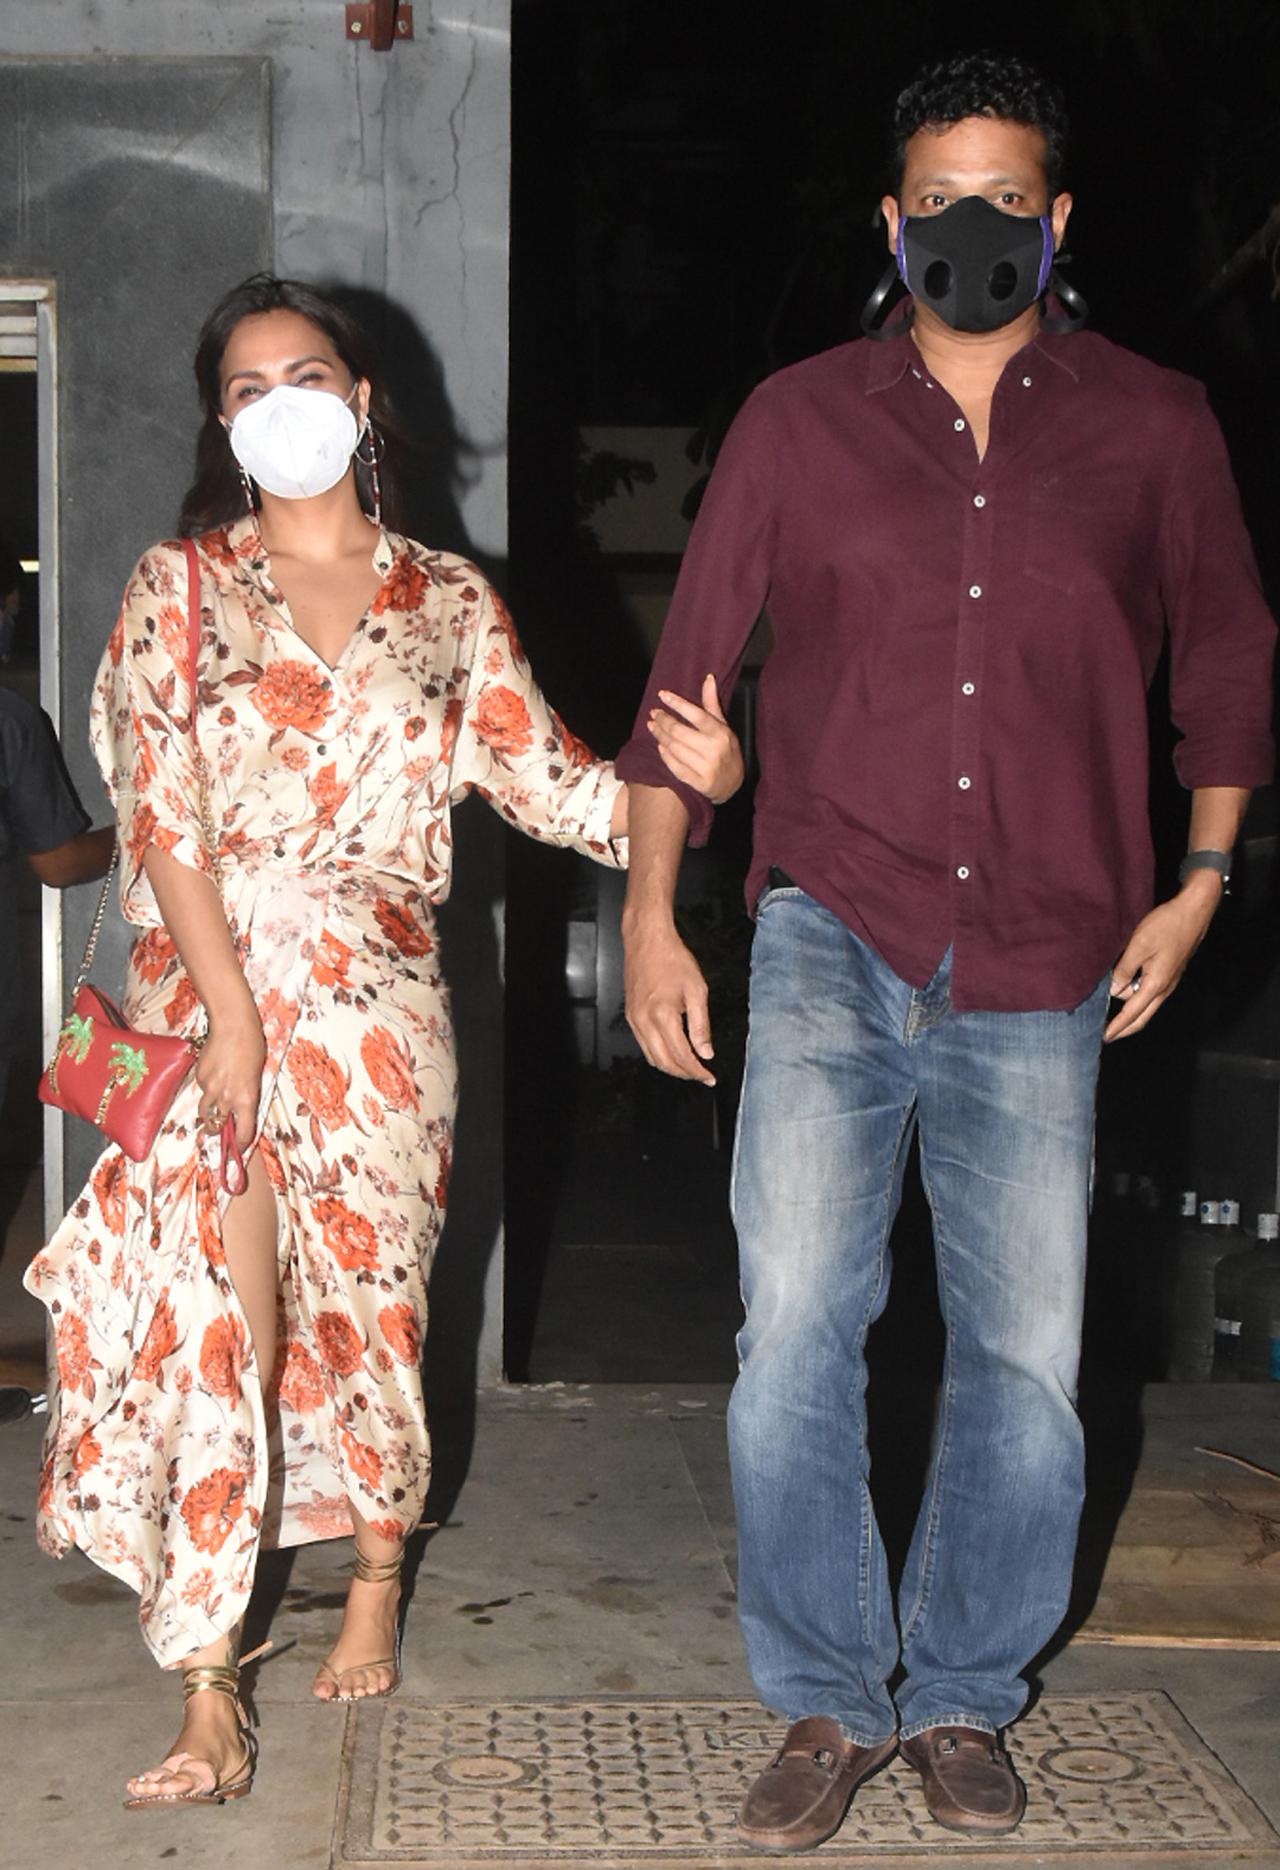 Lara Dutta attended the 'Bell Bottom' screening with husband-tennis player, Mahesh Bhupathi. Lara will essay the role of former Prime Minister Indira Gandhi in the film. The actress opted for a floral-print maxi dress, while Mahesh kept it simple in a formal shirt and blue jeans.